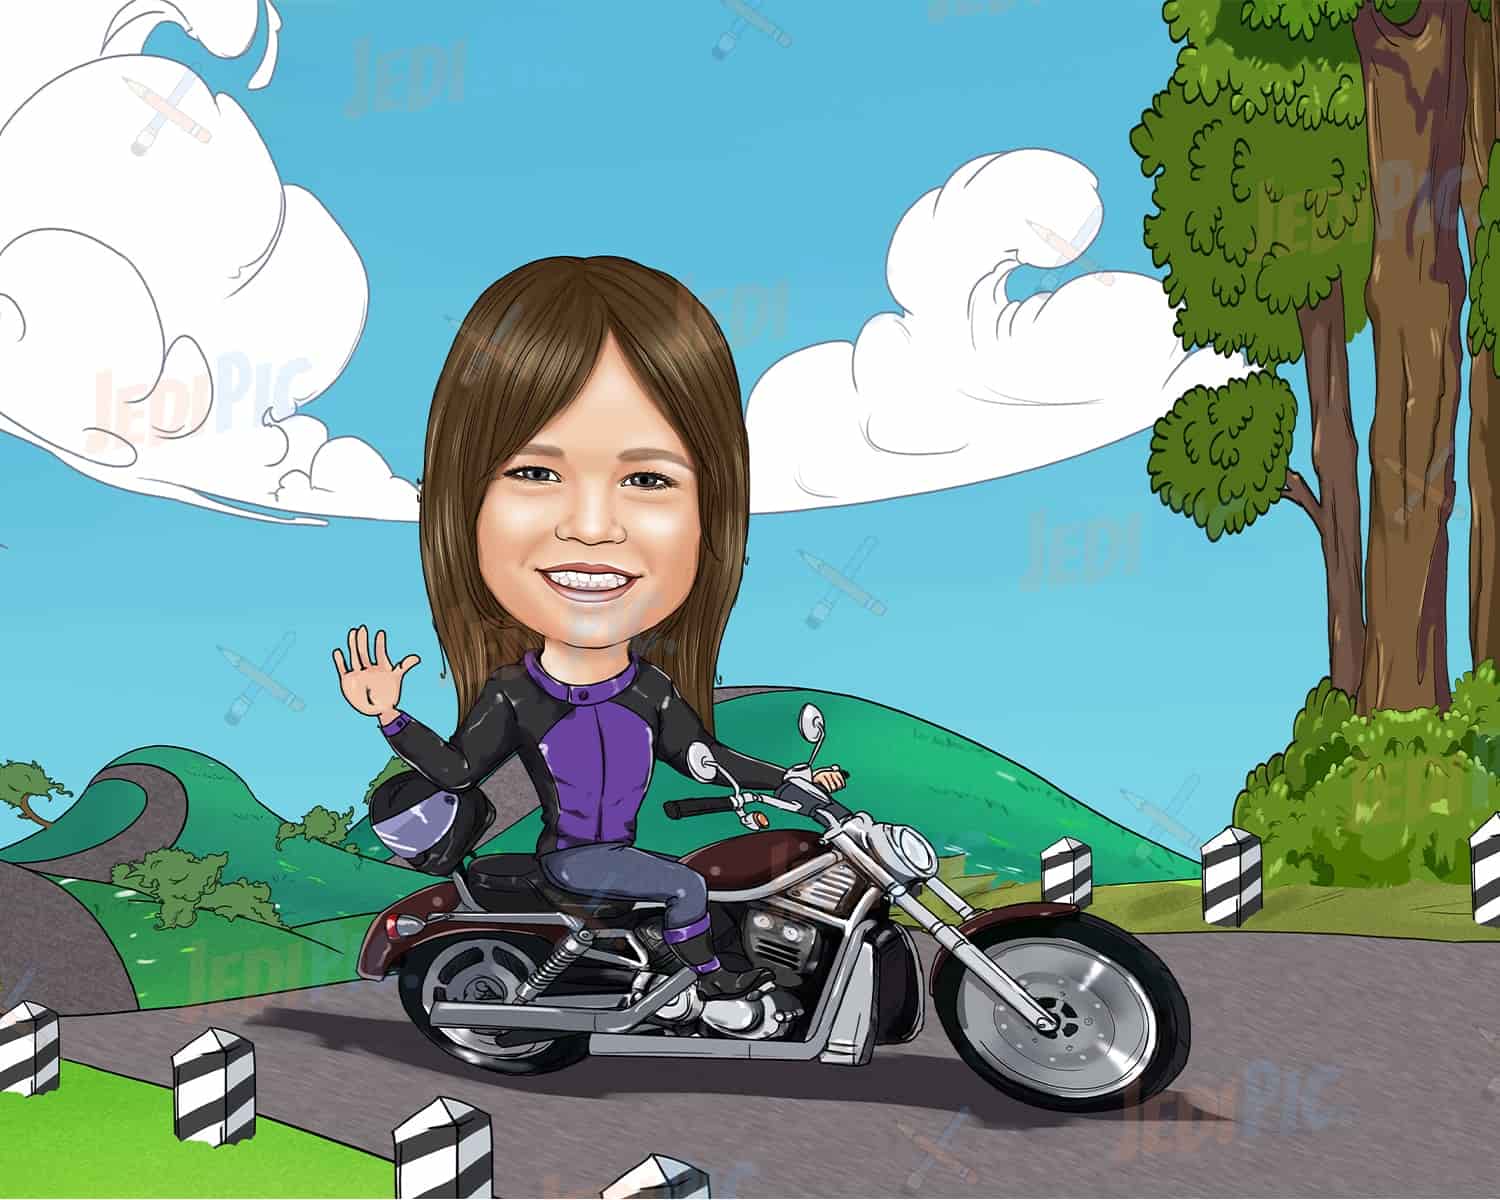 Kid with Motorbike Caricature from Photos